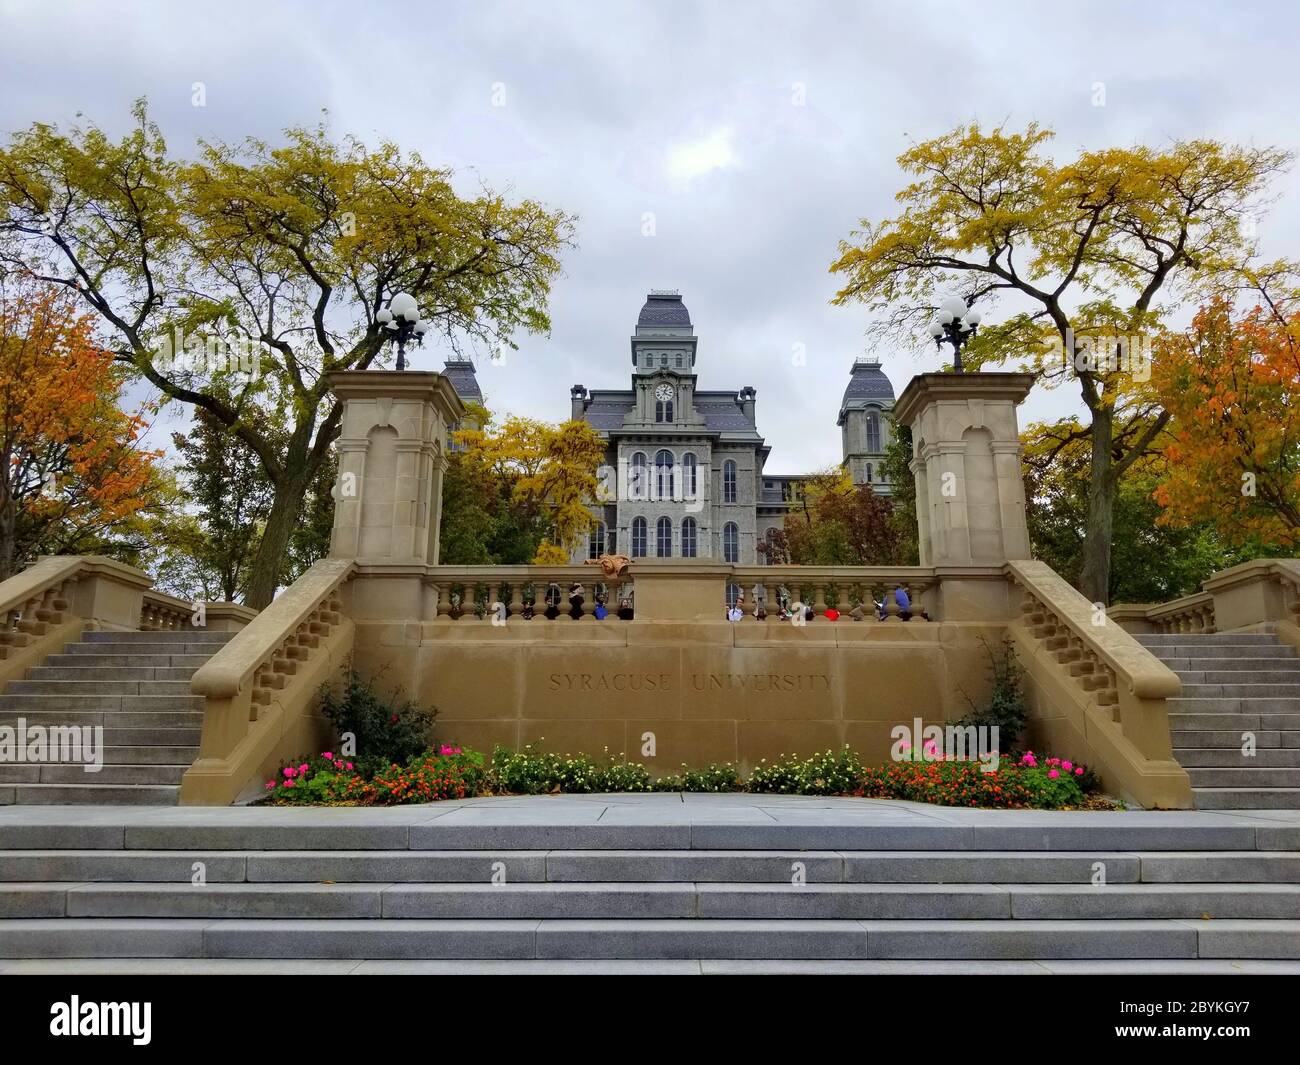 New York, U.S.A - September 9, 2019 - The front stairs by the Pan Am 103 Memorial at Syracuse University Stock Photo